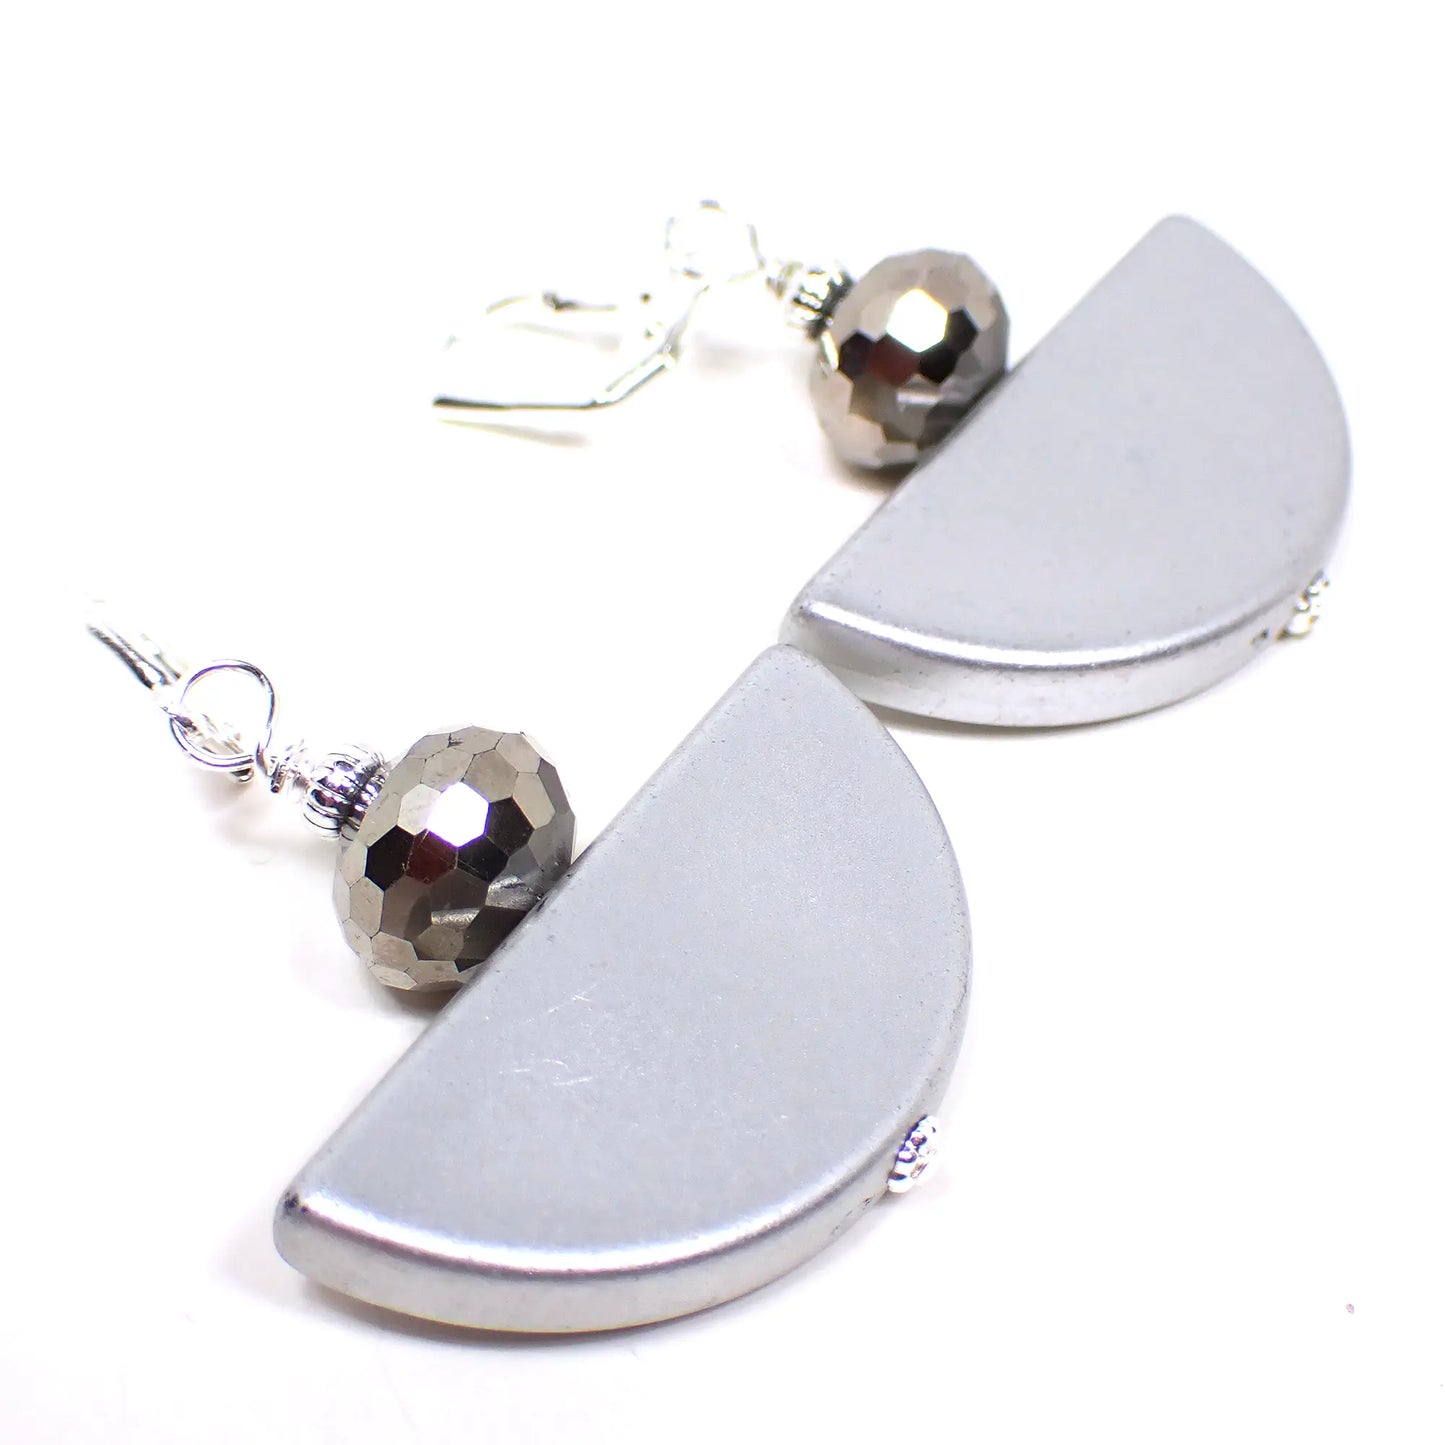 Angled view of the handmade half moon earrings. The metal is bright silver in color. There are faceted round metallic silver colored glass beads on top. The bottom beads are vintage acrylic beads that are half moon shaped and matte metallic silver in color.